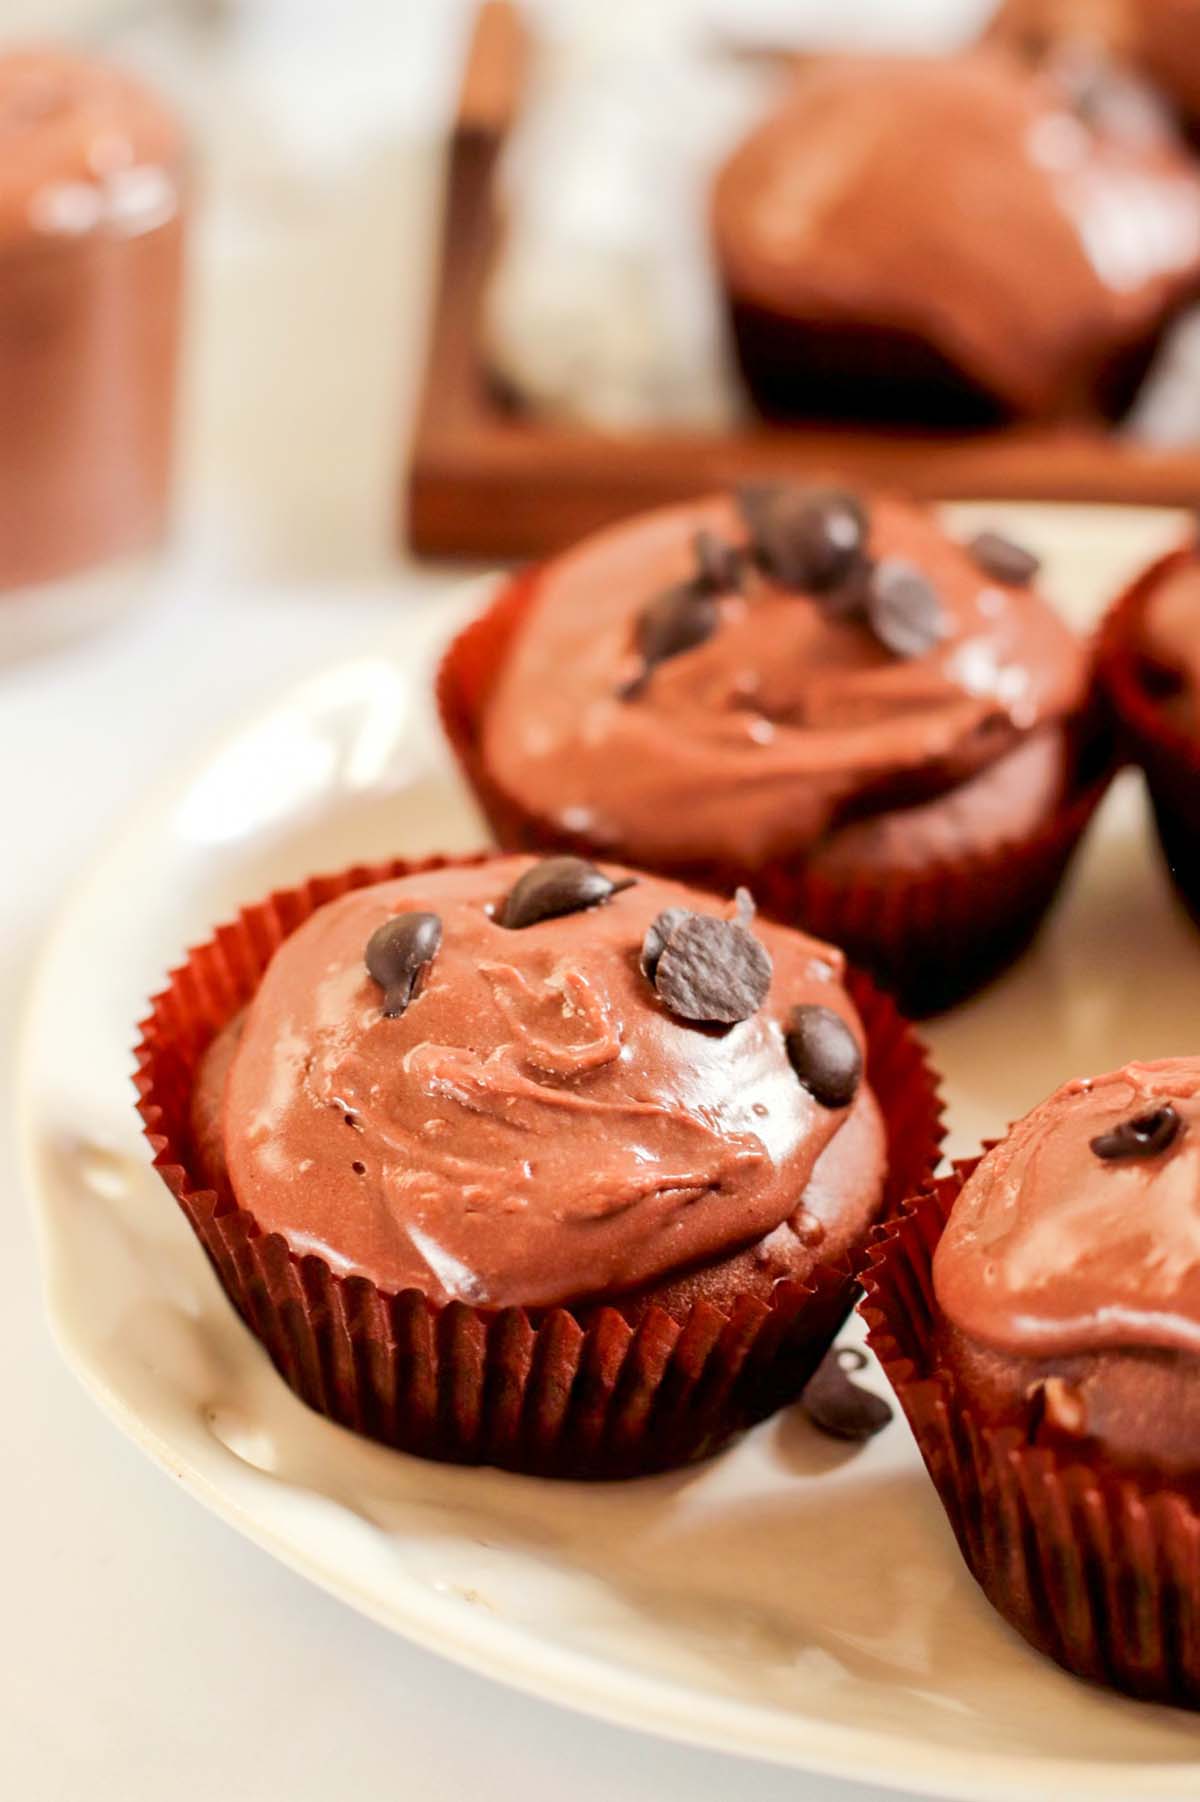 chocolate cupcakes on a plate.